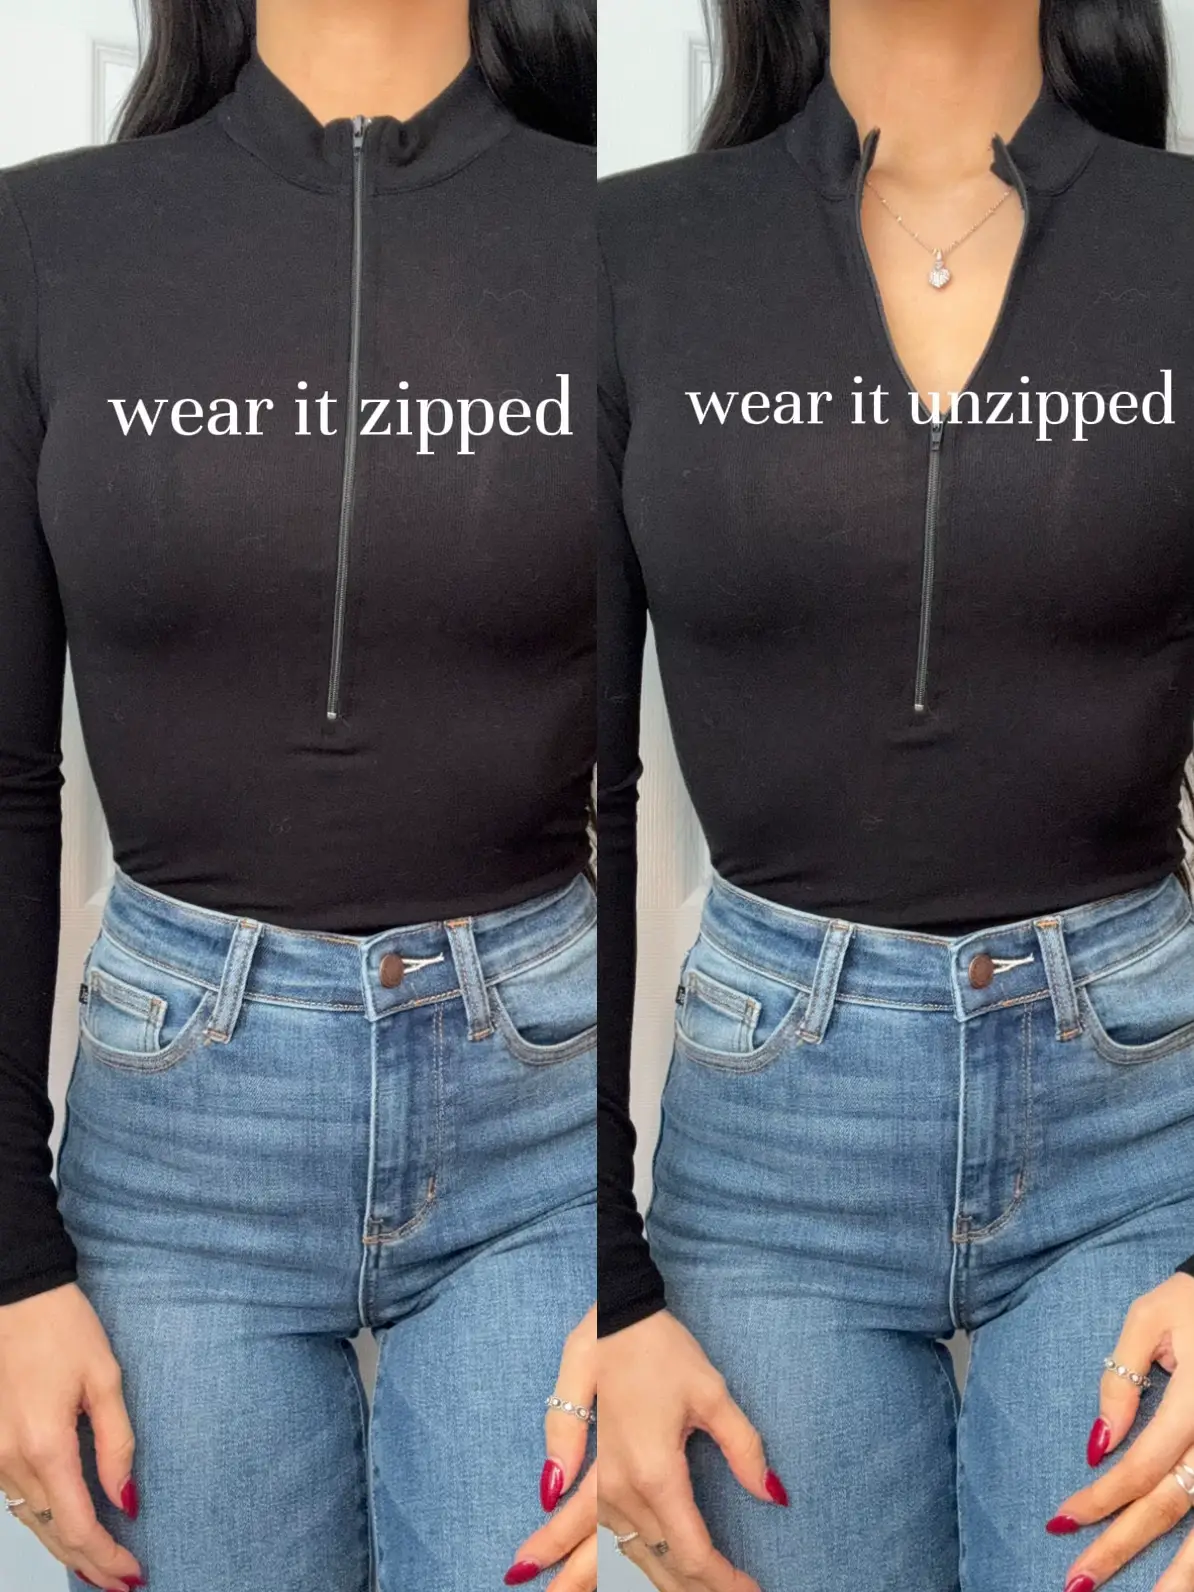 I did a Skims haul – I ordered two tops and they were so see through it was  'laughable